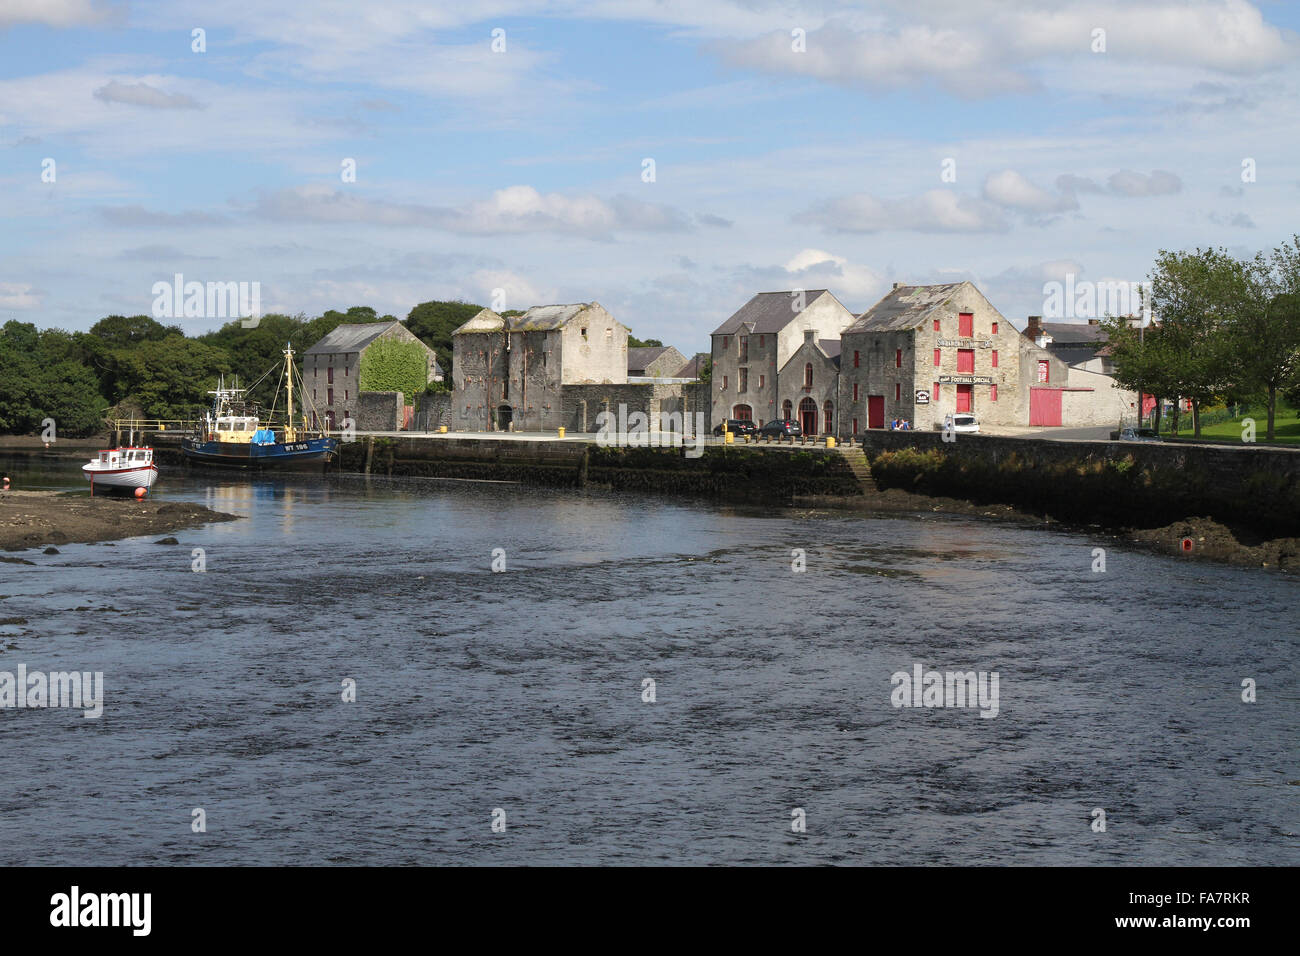 Harbour quay on River Lennon at Ramelton County Donegal Ireland. Stock Photo